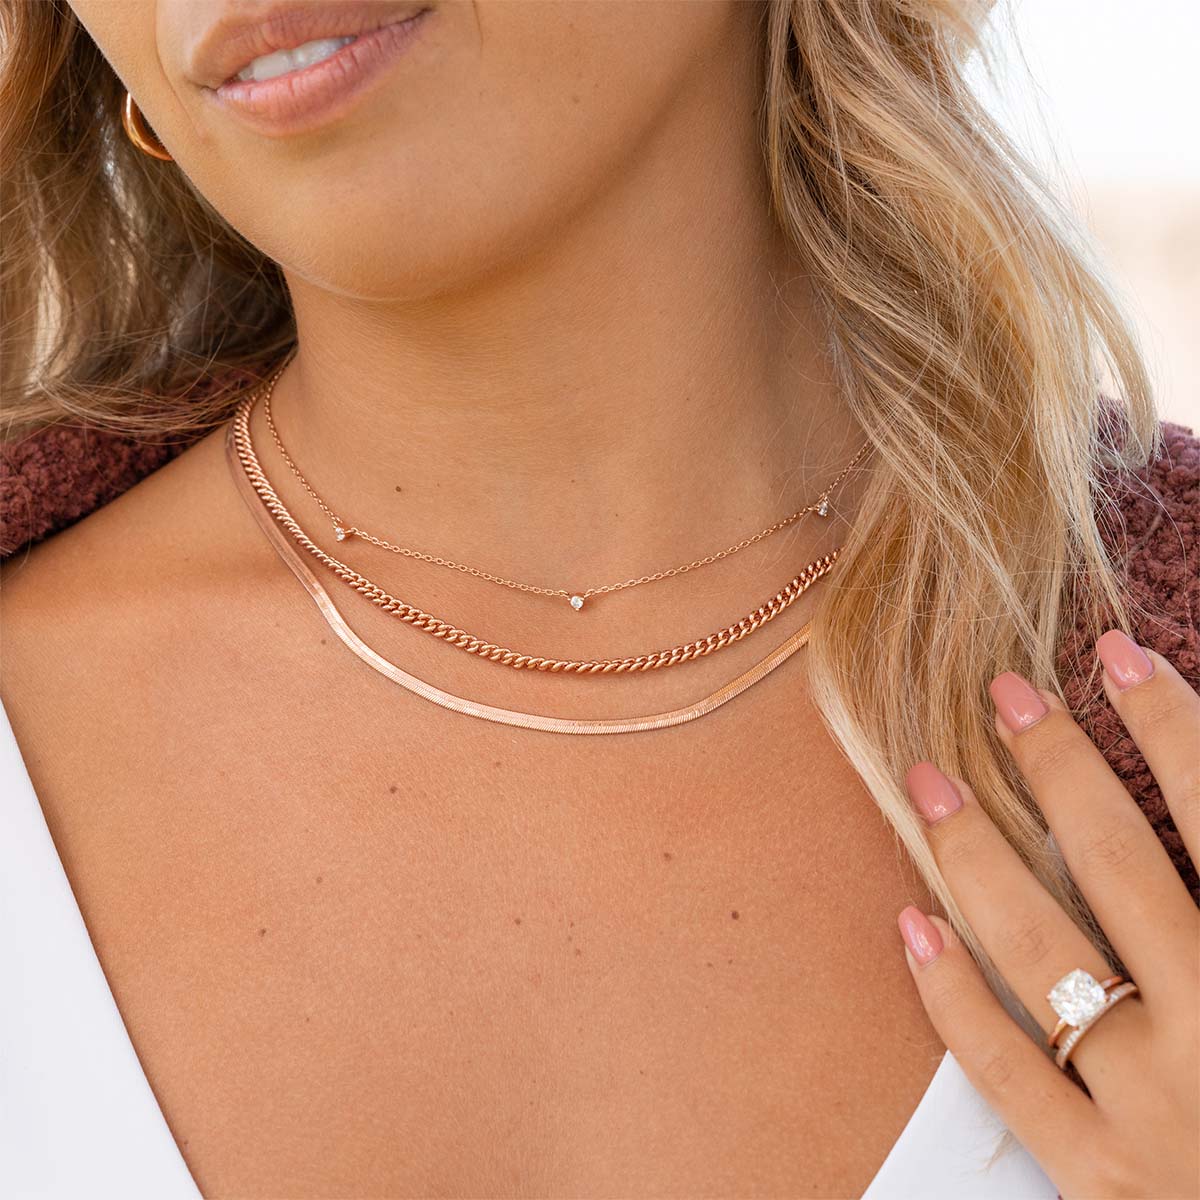 Women's Dainty Layered Choker Link Chain Necklace